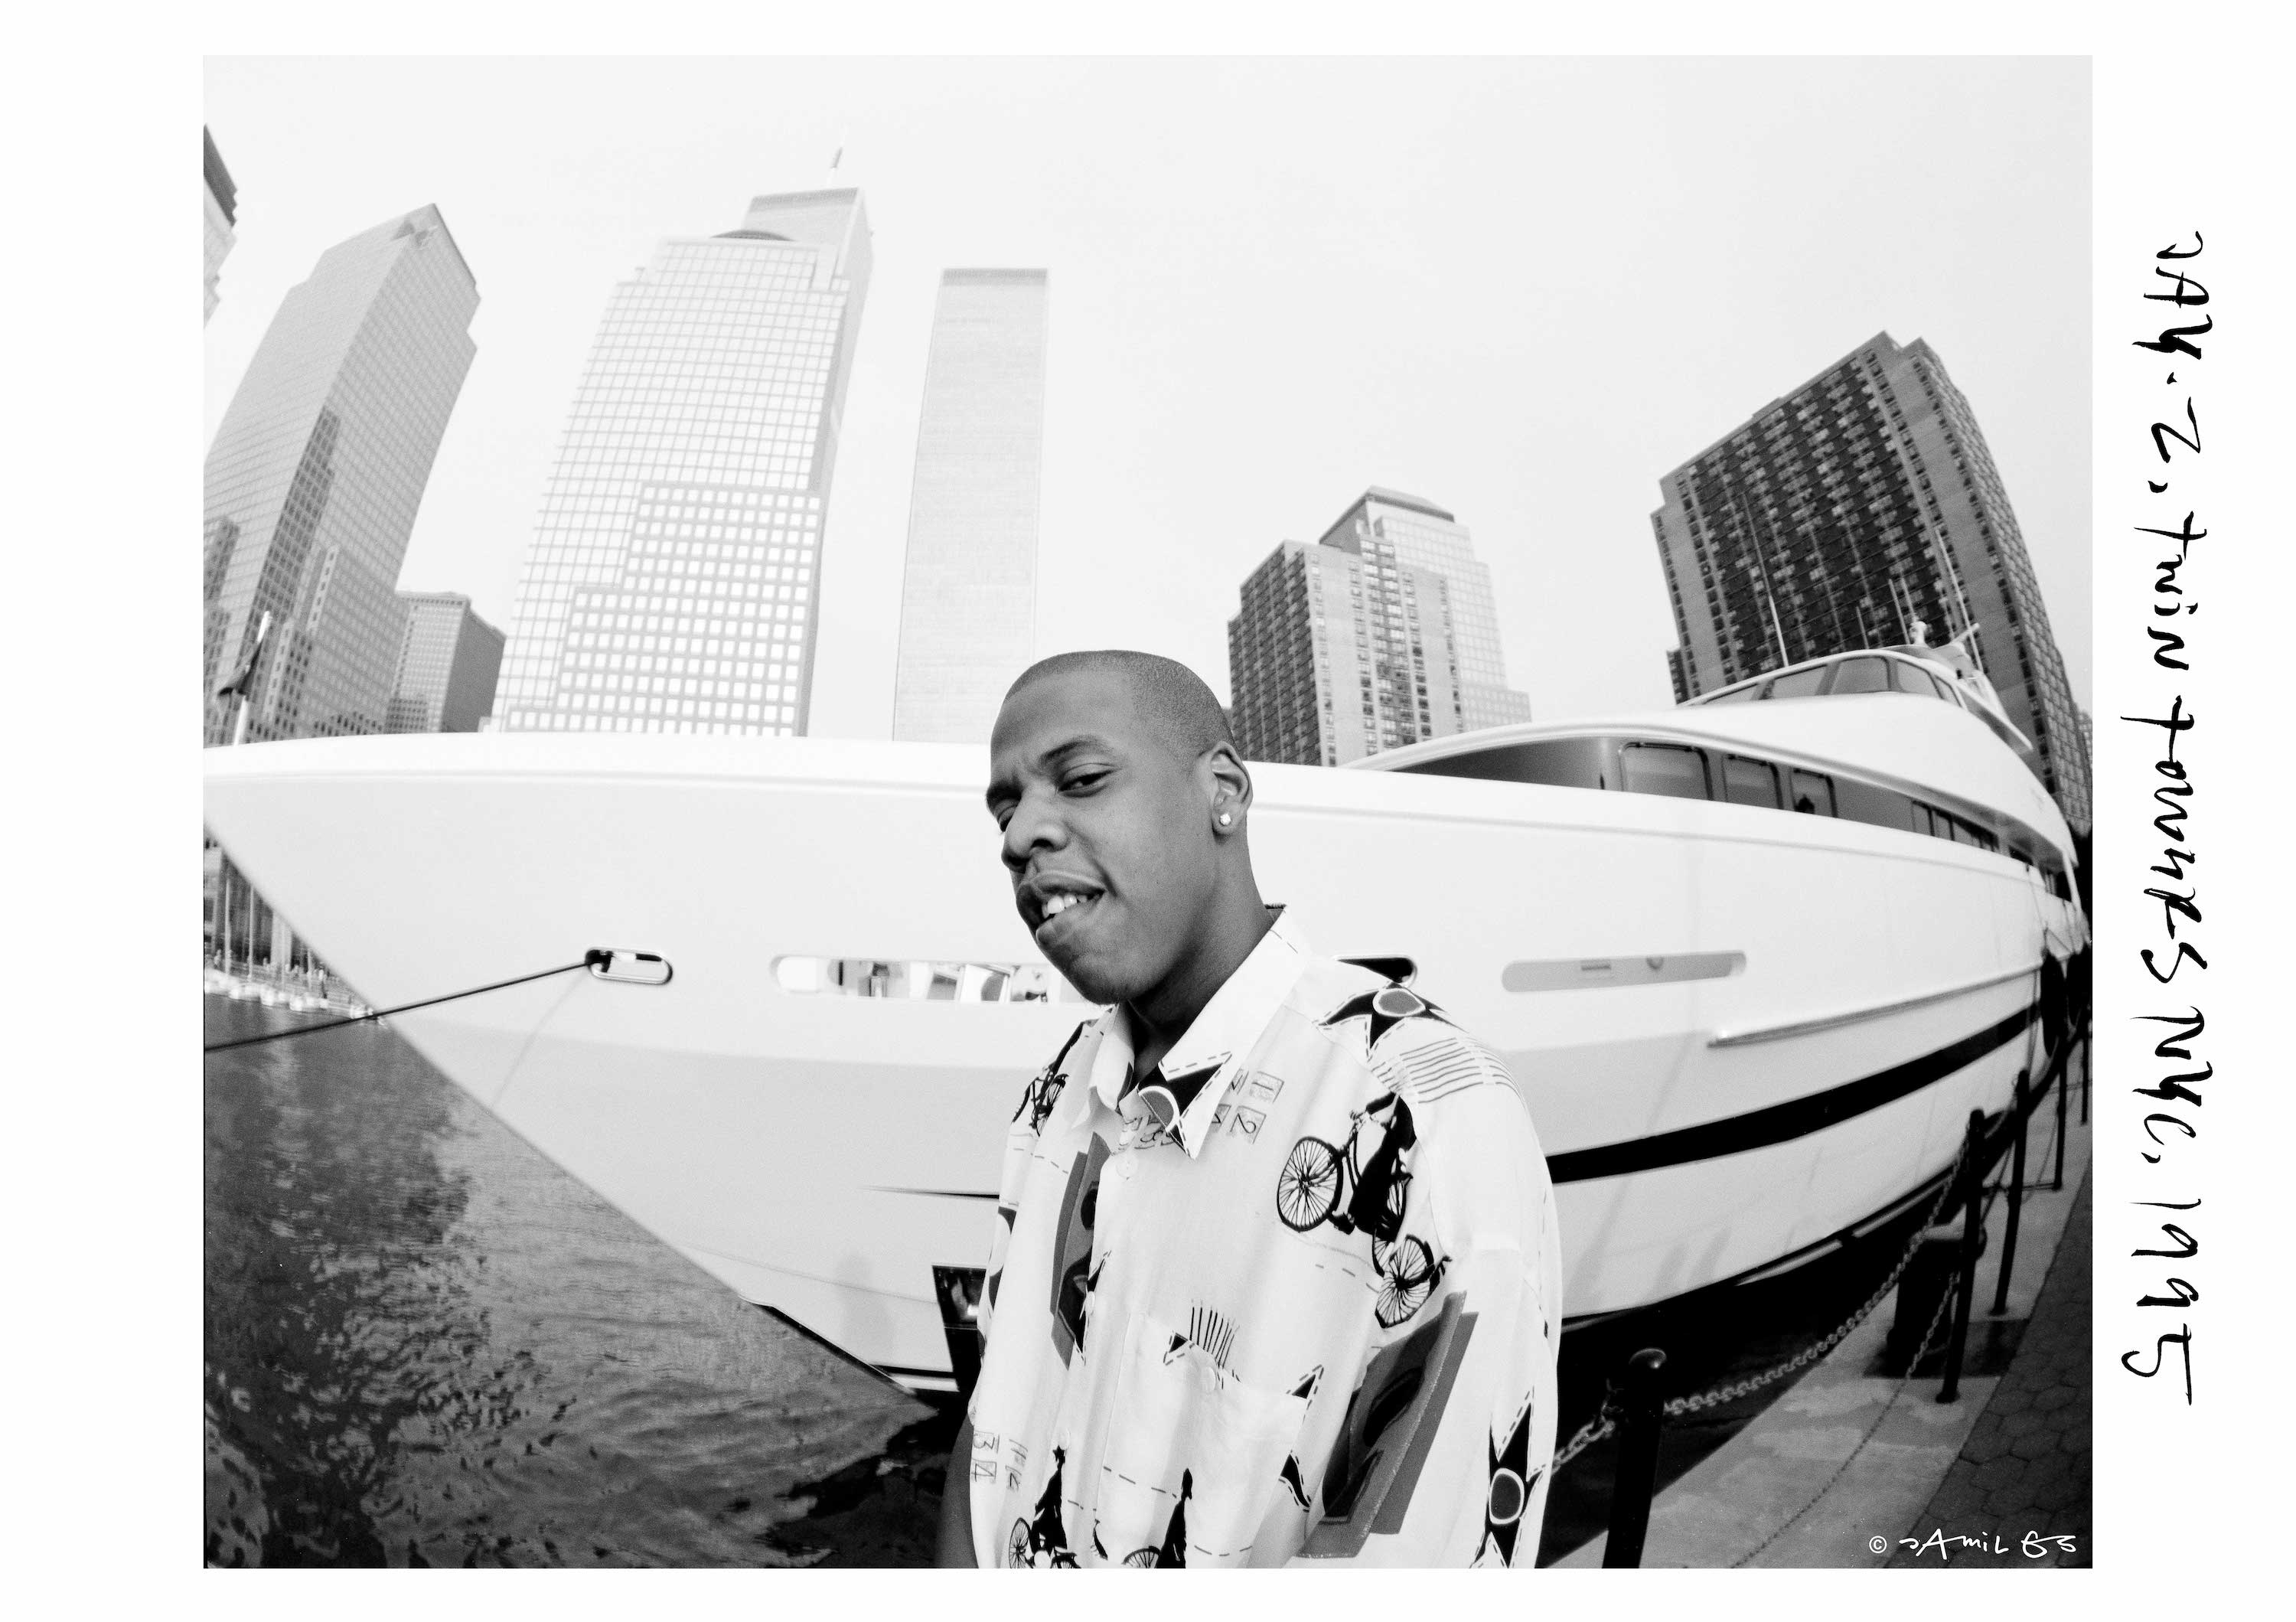 JAY Z photographed in front of a yacht in nyc in 1995 by jamil gs.